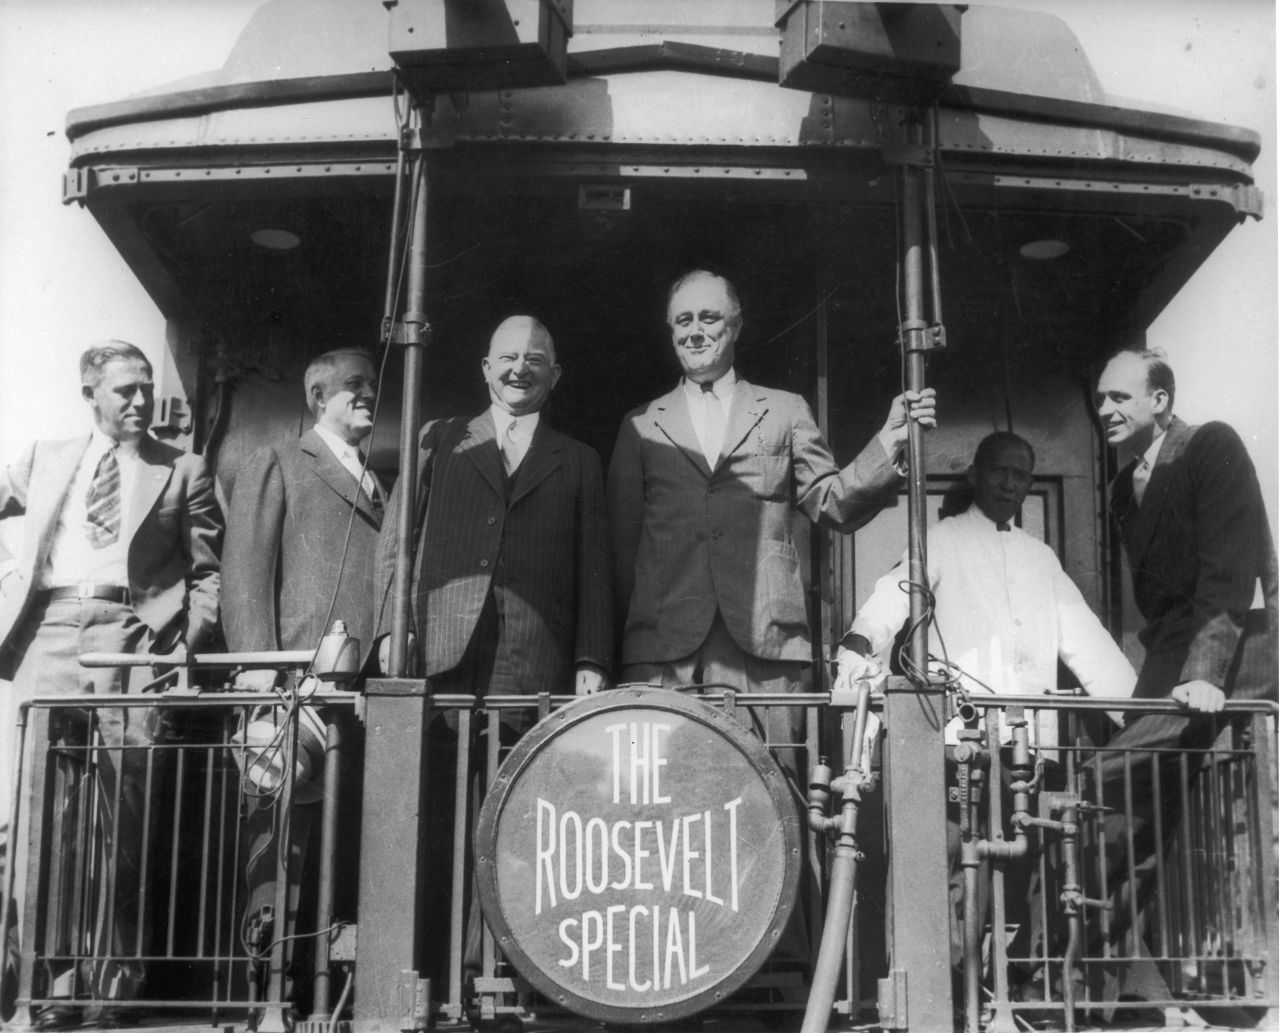 President Franklin D. Roosevelt and his colleagues pose aboard "The Roosevelt Special" campaign train on September 14, 1932. When Roosevelt ran for president eight years later, he used the slogan, "Better a third-termer than a third-rater."